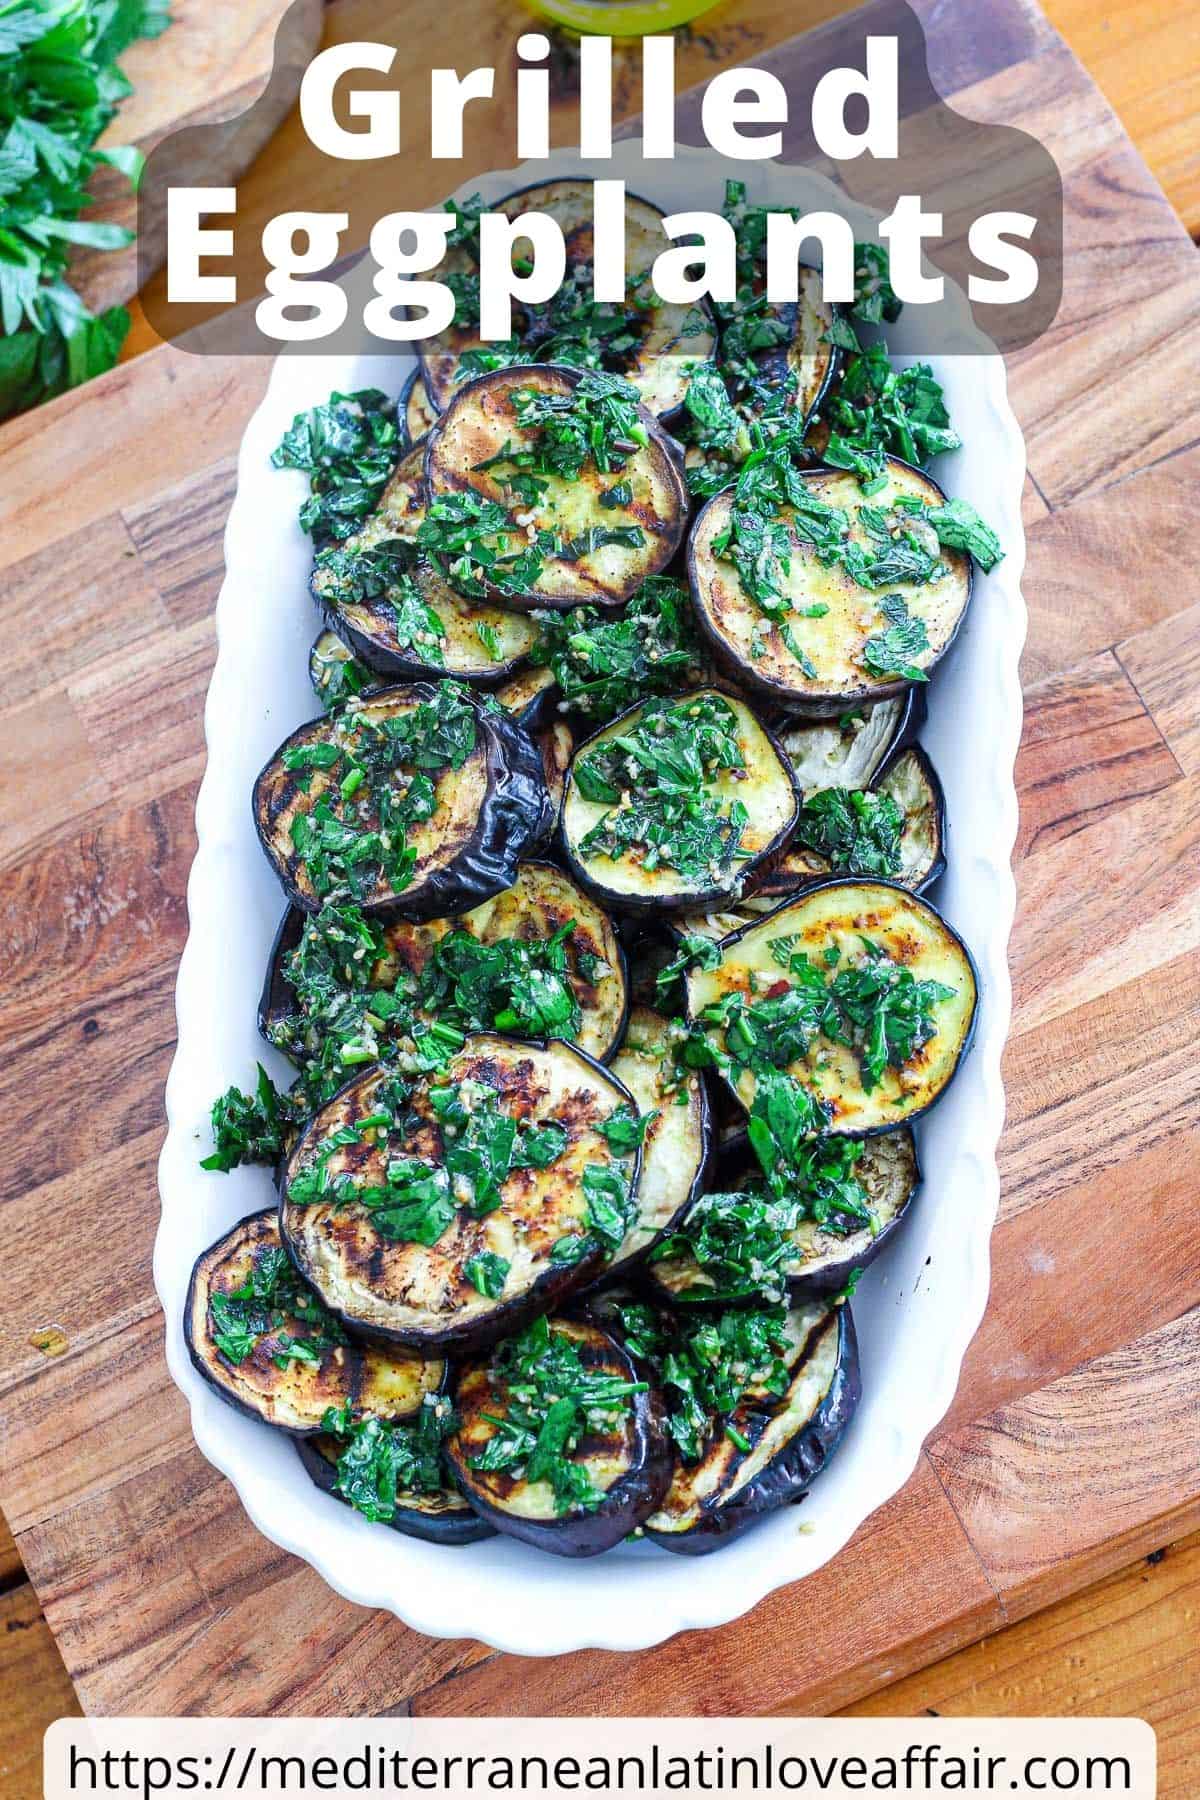 An image prepared for Pinterest. It shows a picture of the grilled eggplants on a platter covered with a herb like topping. Picture has a title bar on top and a website link at the bottom.